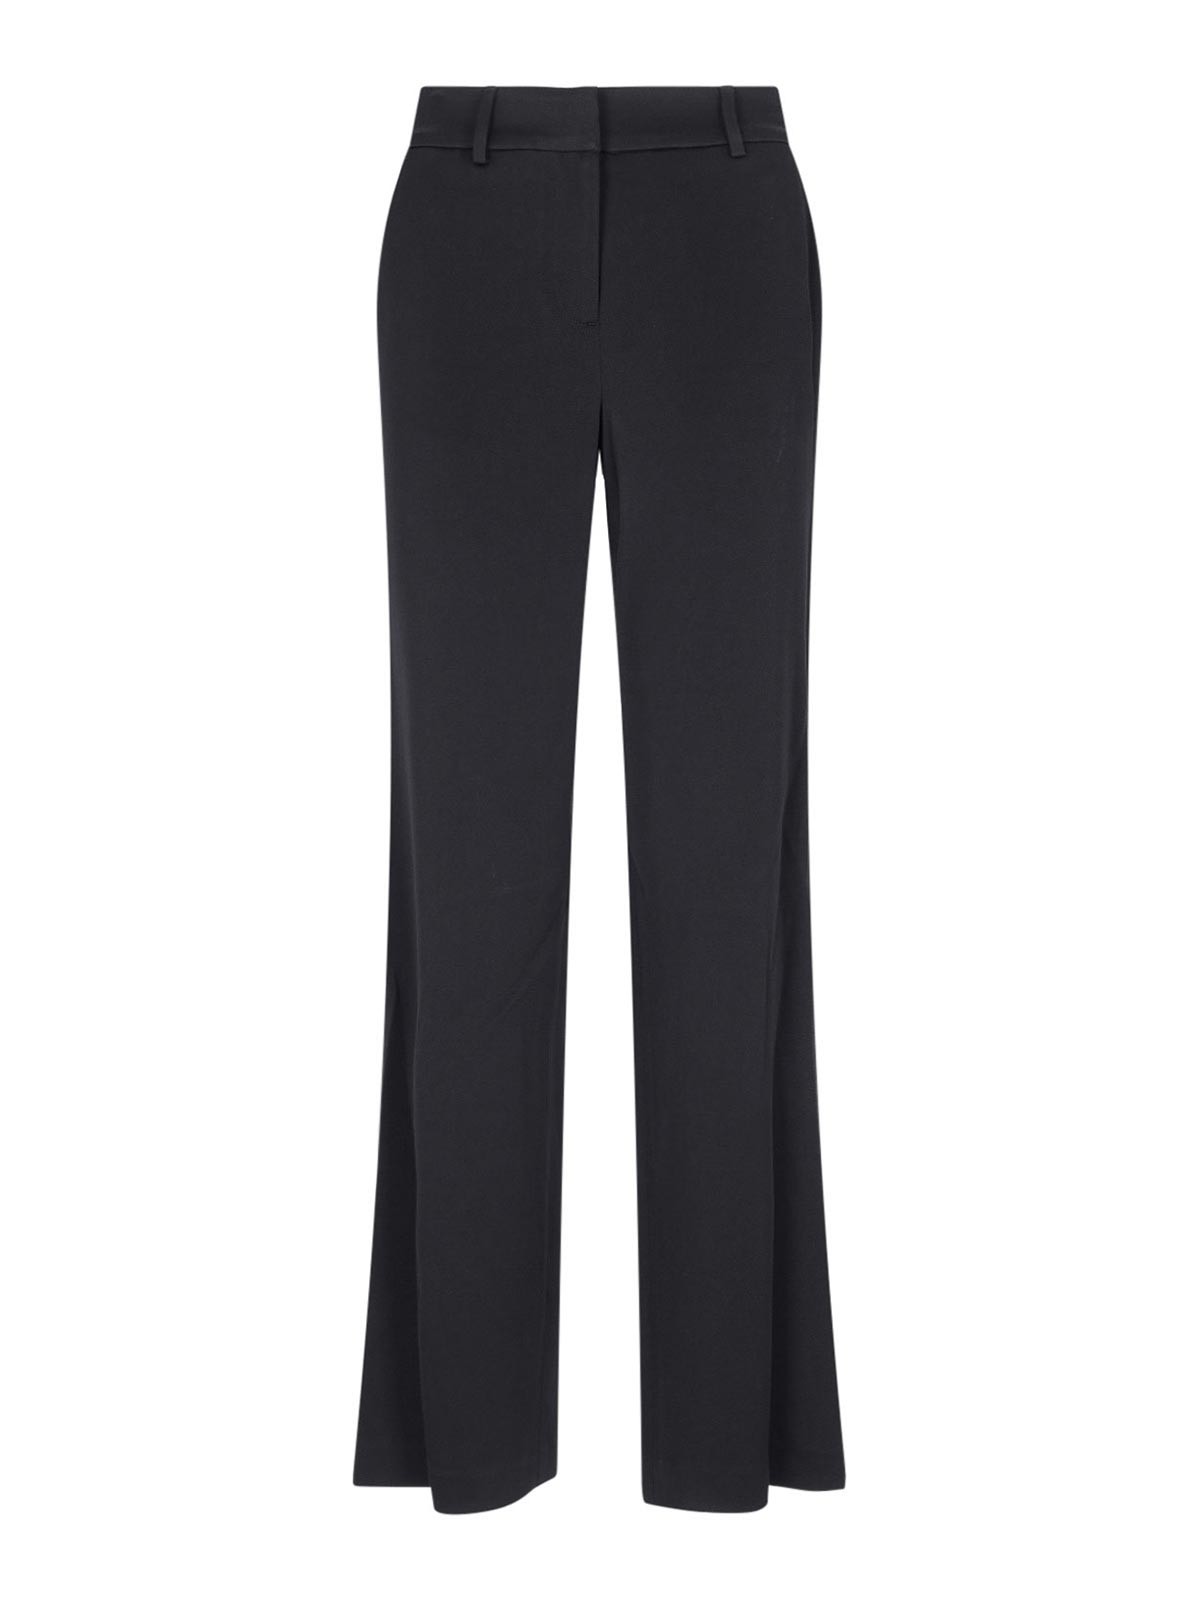 Trousers Michael Kors Black size 8 US in Polyester - 41200443